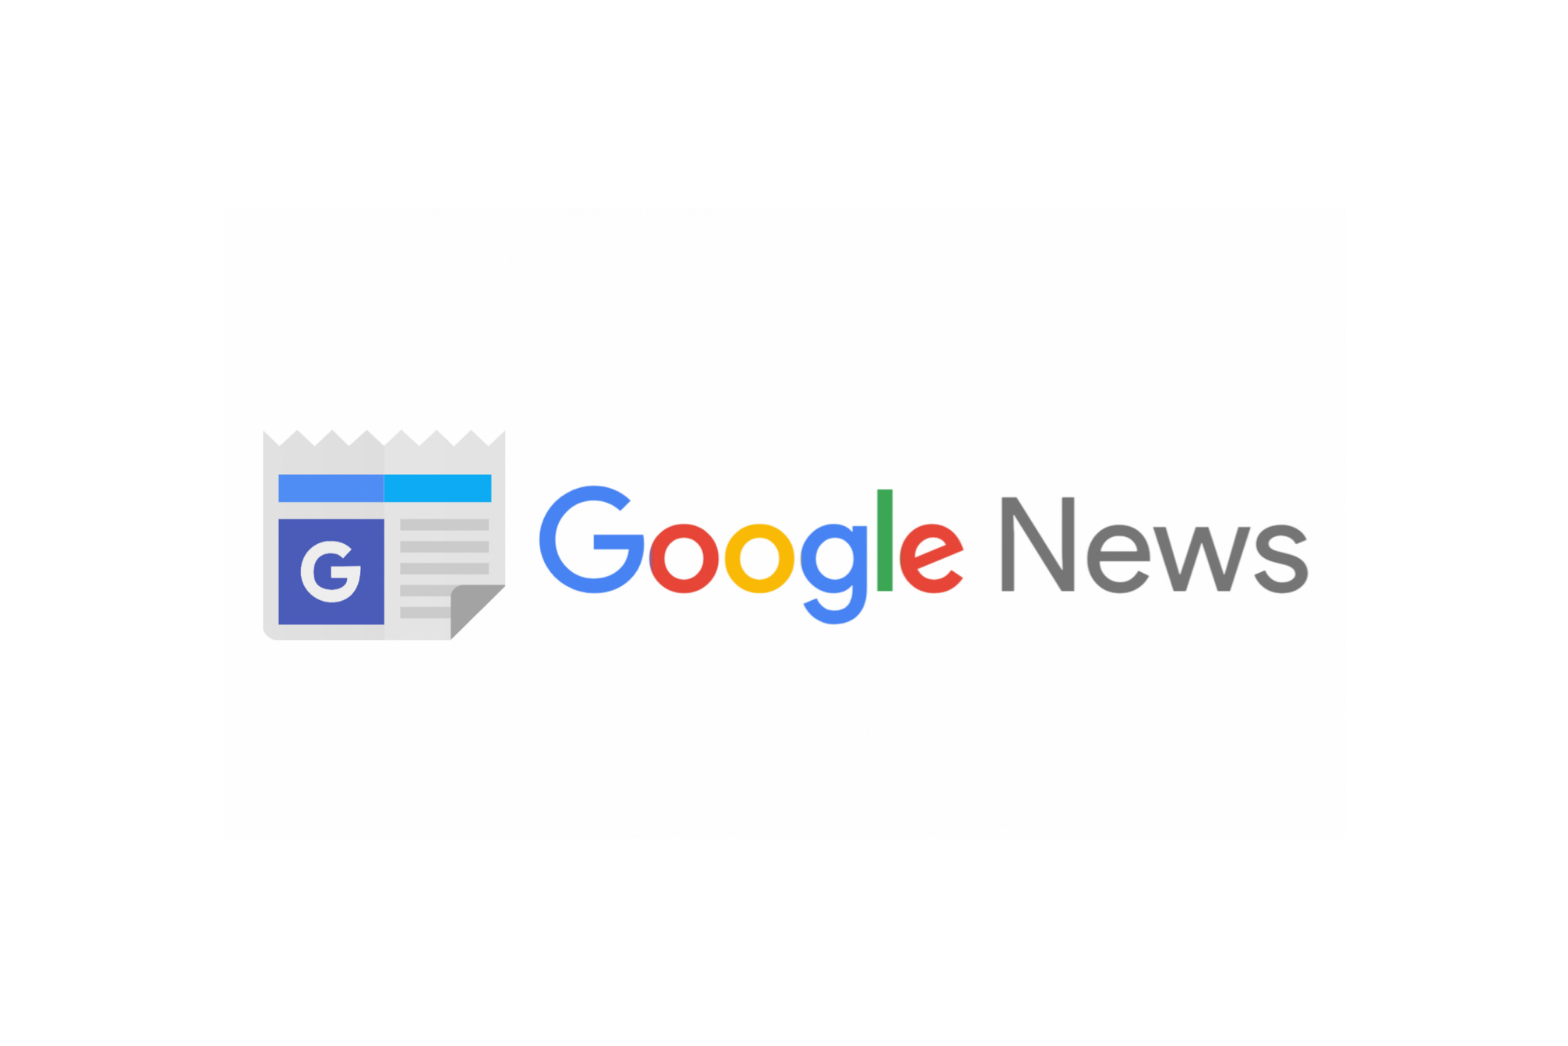 Benefits of Getting Listed in Google News for Your Business